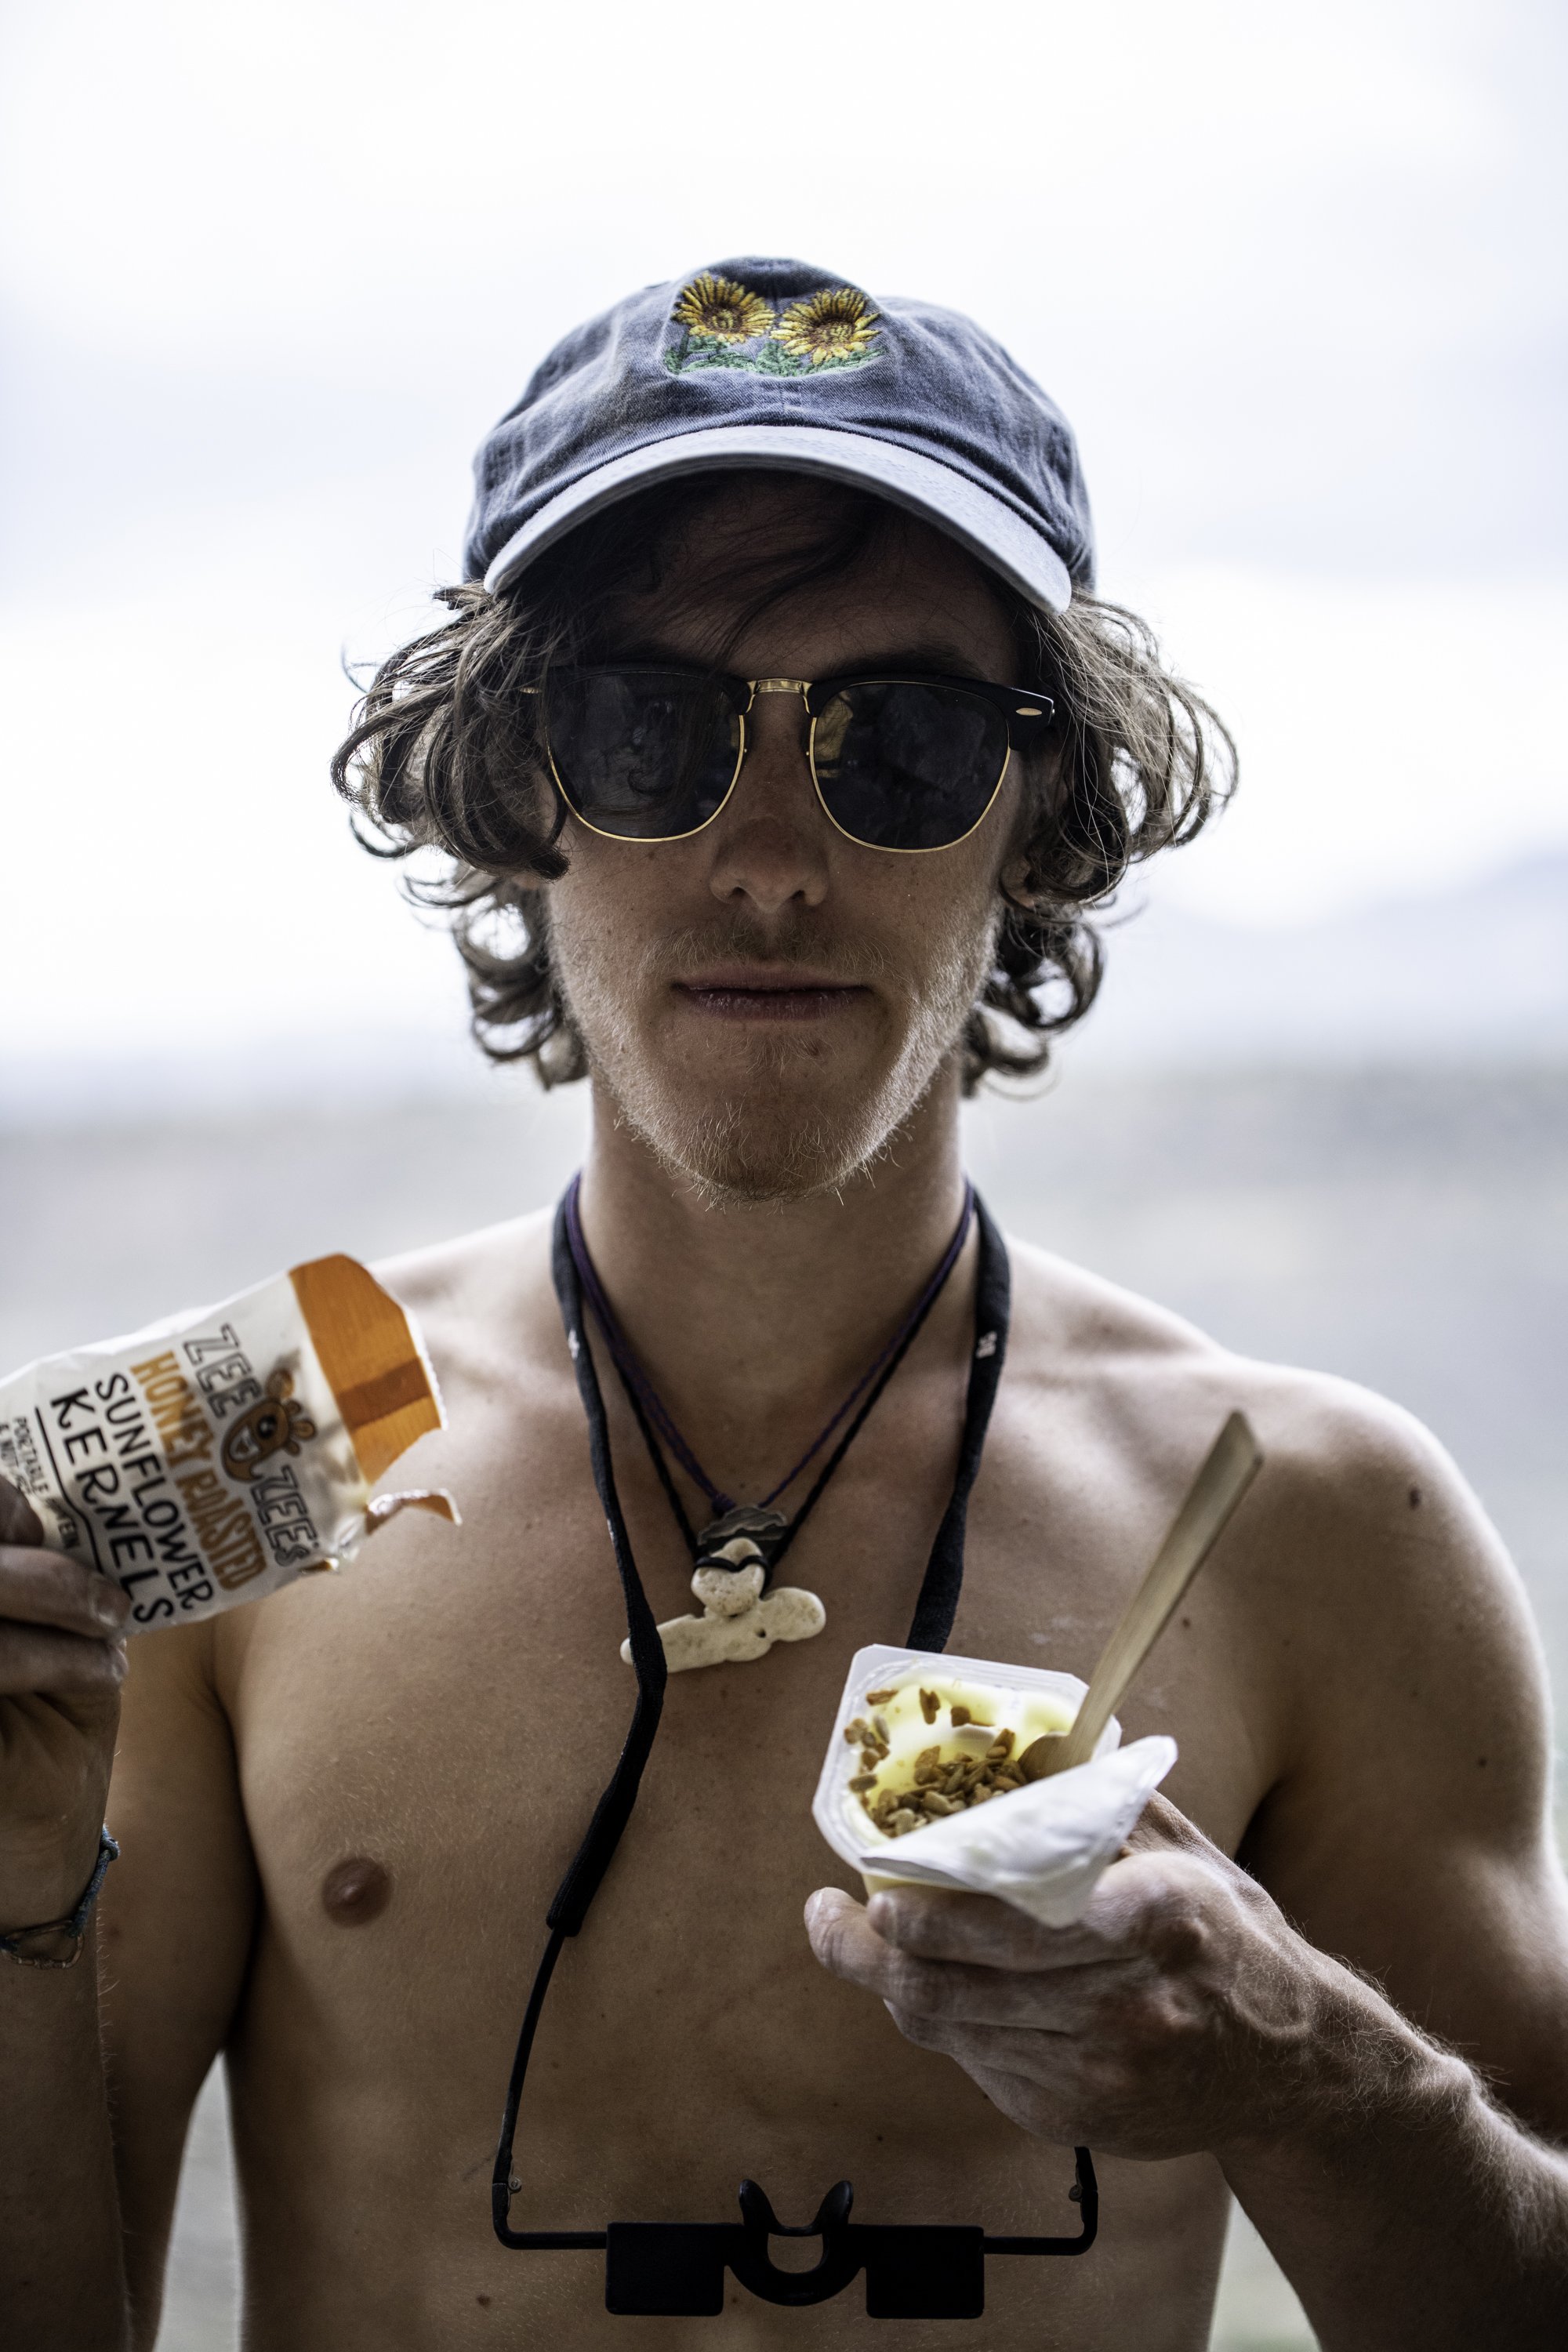  Kyle Higby pauses for a portrait while snacking on sunflower seeds and vanilla pudding while climbing in Taos, N.M. on June 17, 2022.  